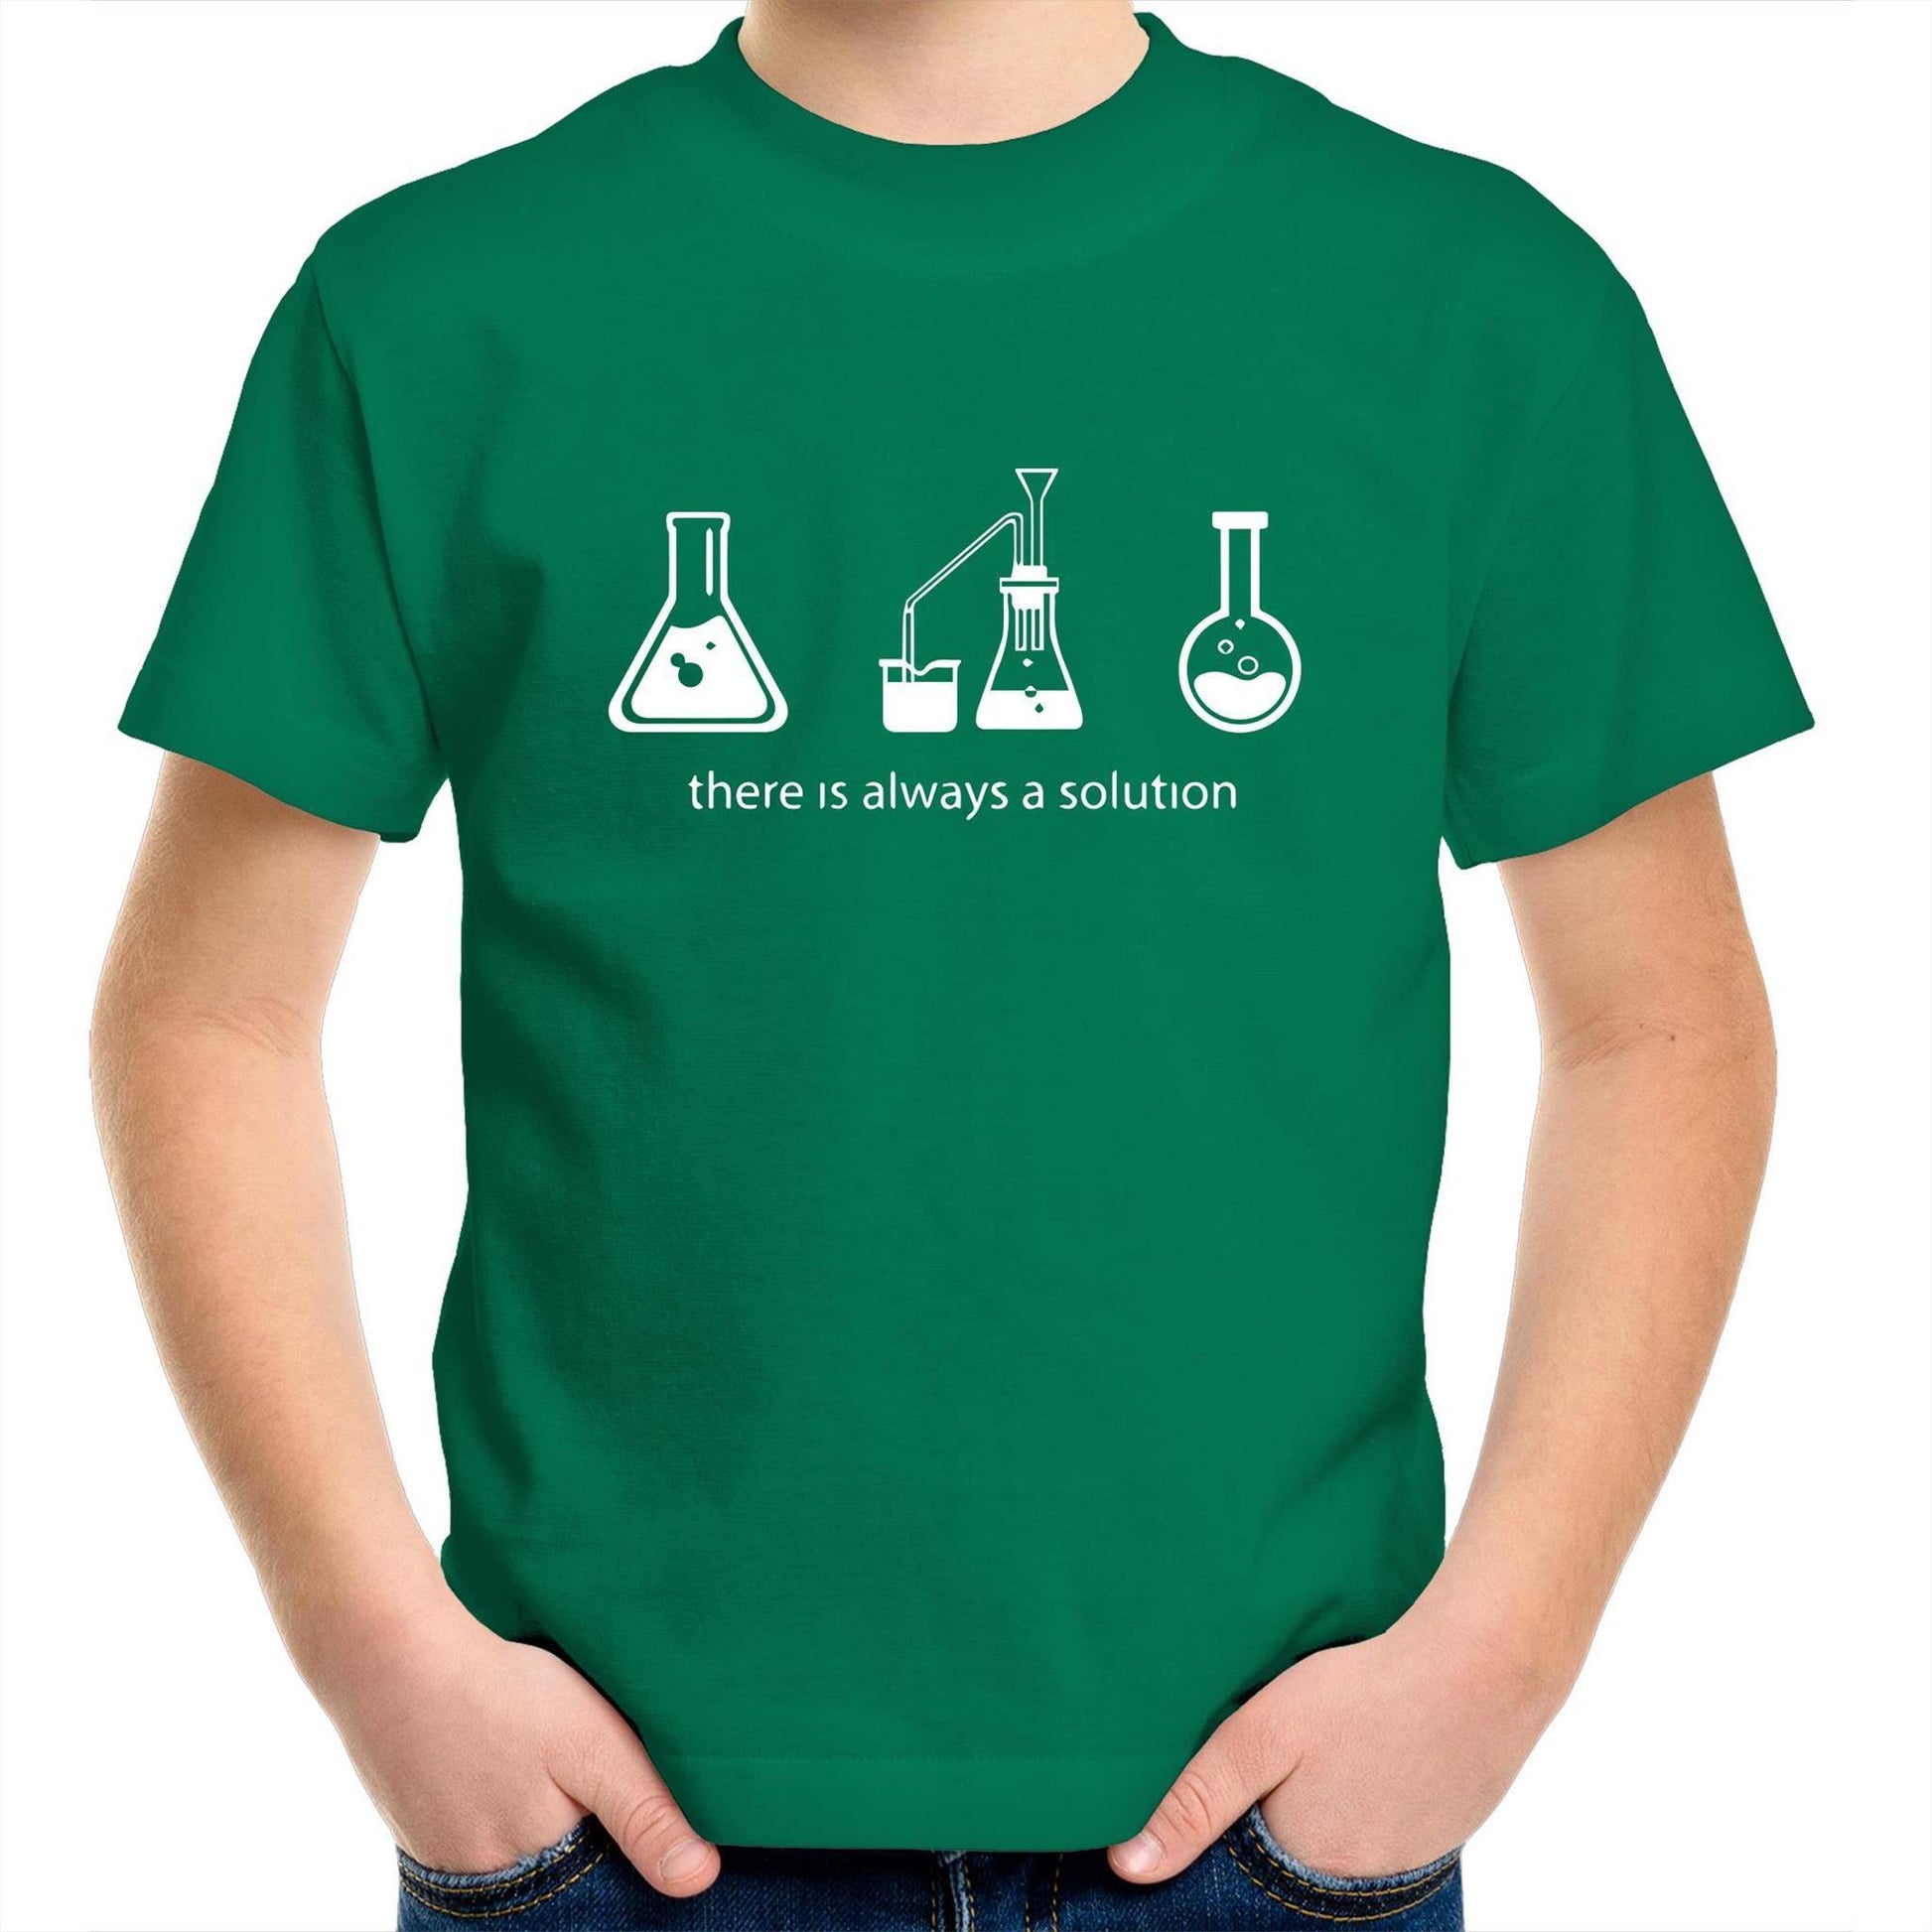 There Is Always A Solution - Kids Youth Crew T-Shirt Kelly Green Kids Youth T-shirt Science